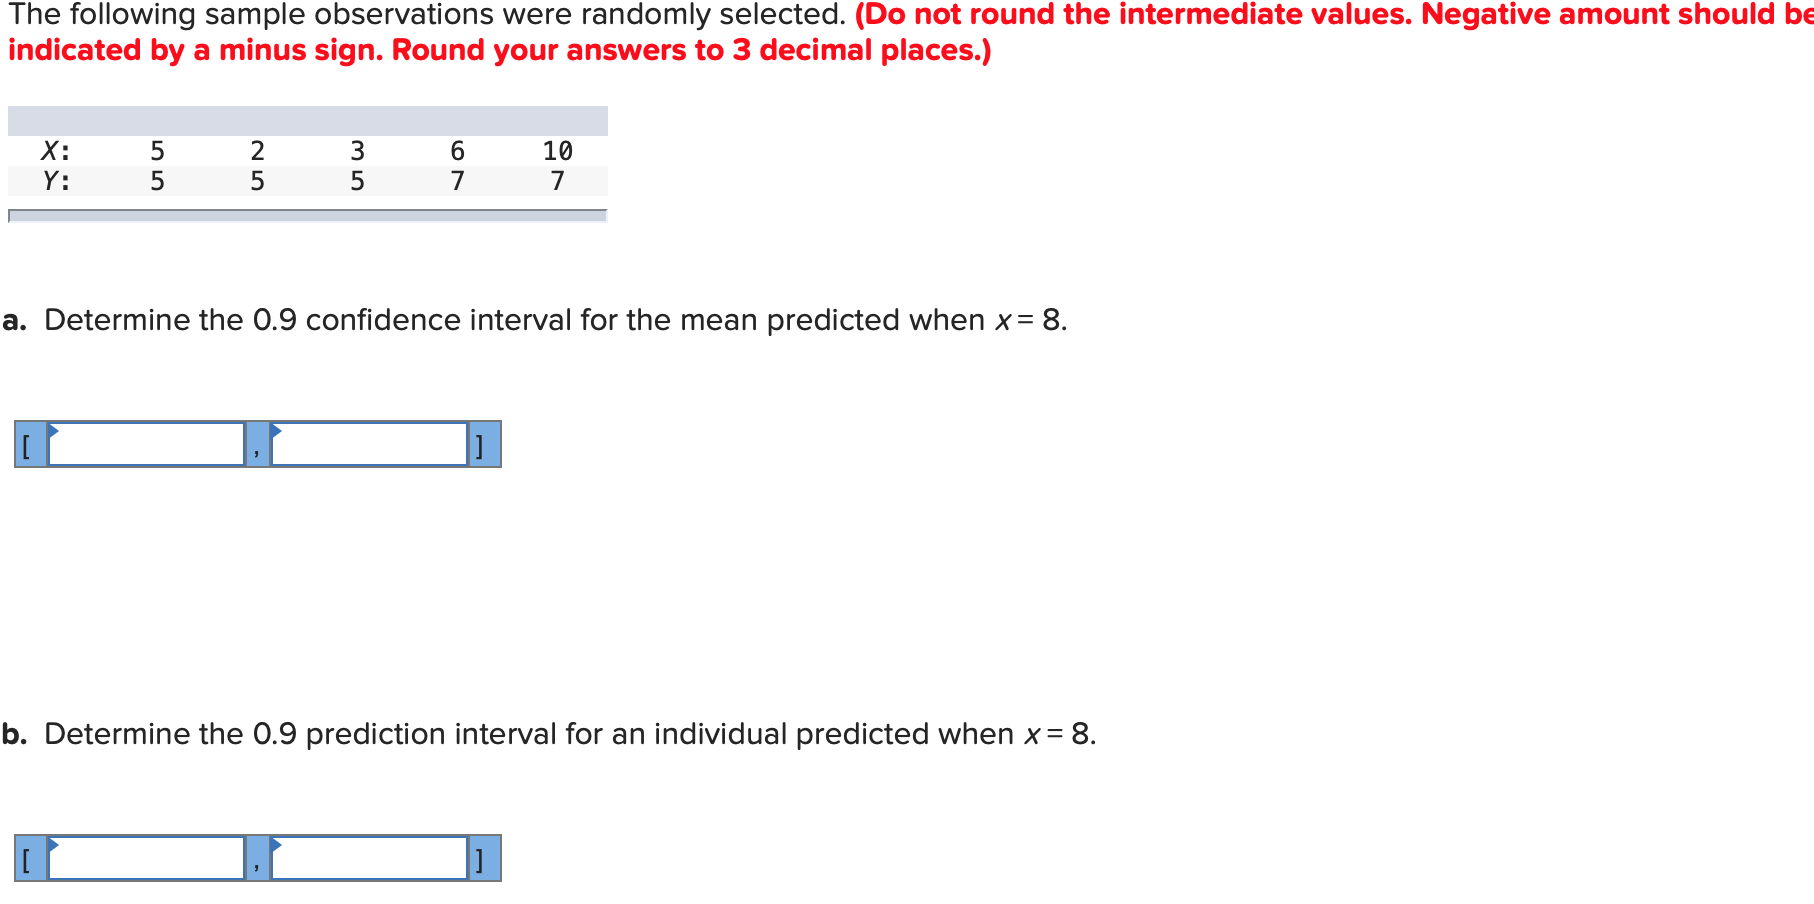 X:
2
10
Y:
a. Determine the 0.9 confidence interval for the mean predicted when x= 8.
o. Determine the 0.9 prediction interval for an individual predicted when x= 8.
